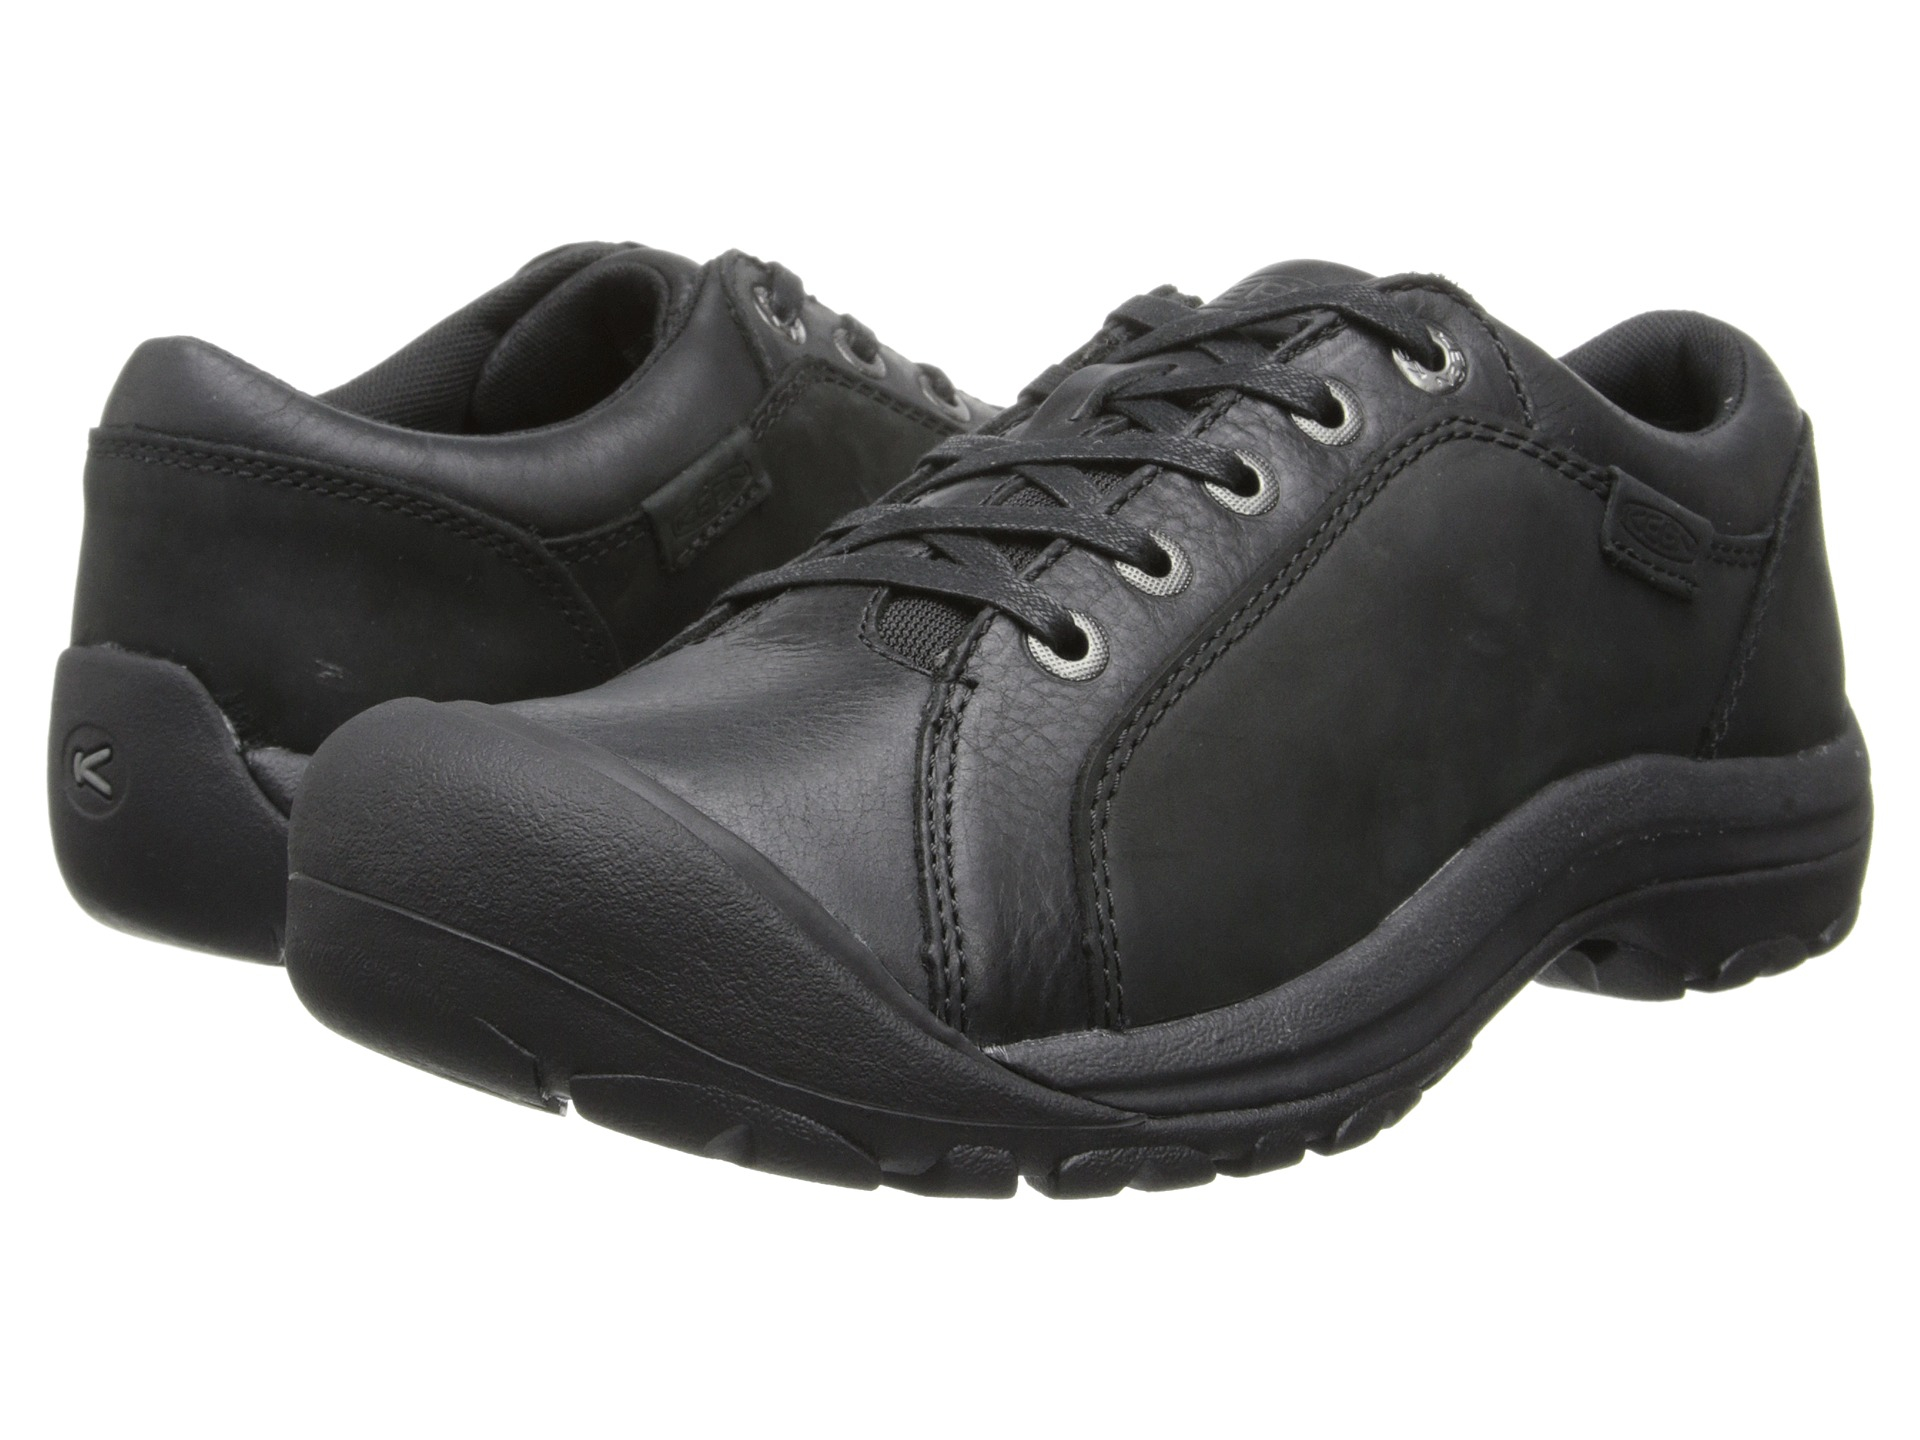 Lyst - Keen Briggs Leather in Black for Men